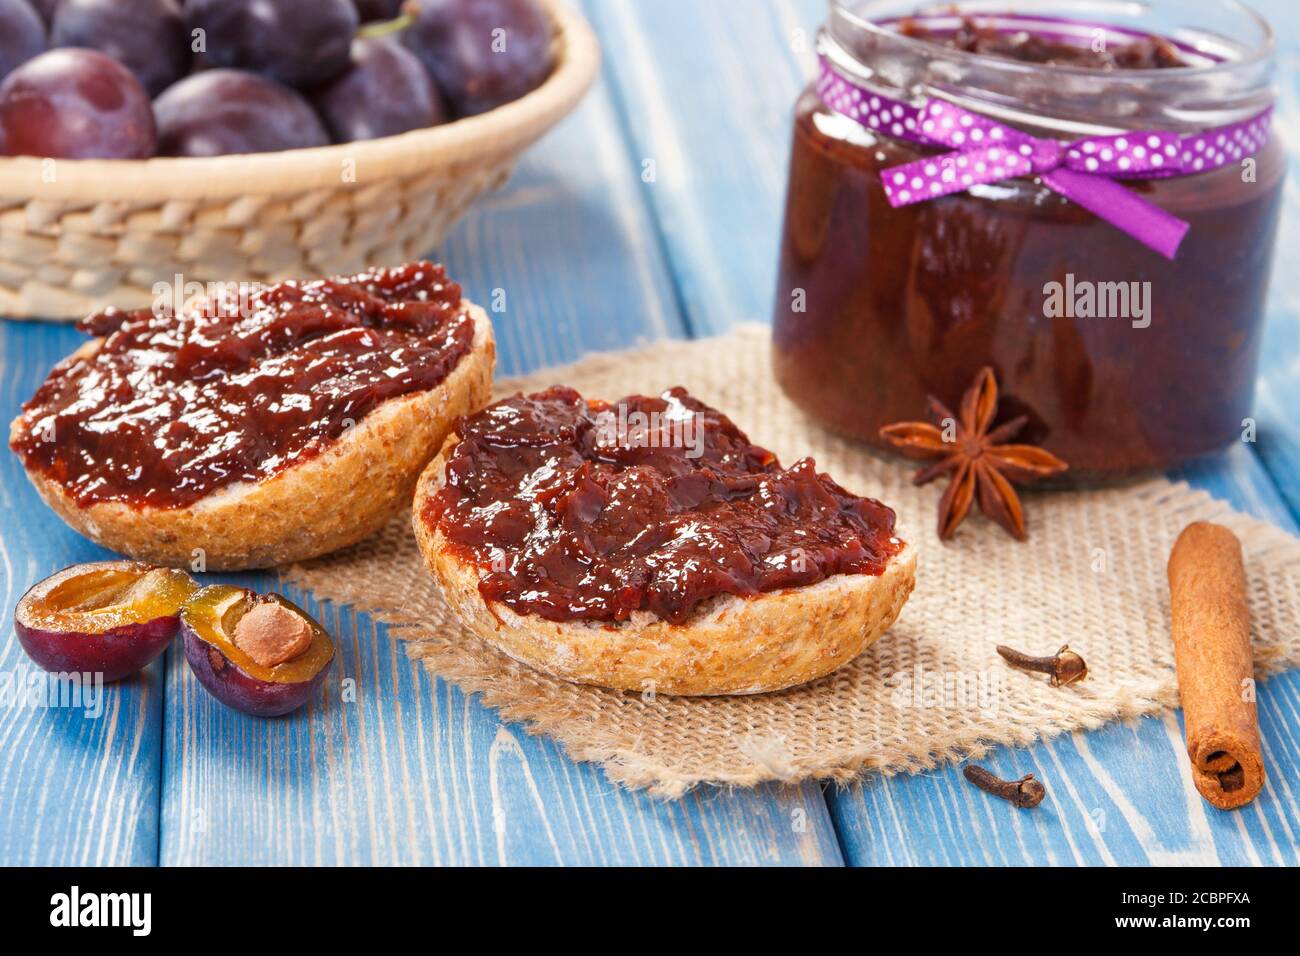 Sandwiches with plum marmalade or jam, concept of healthy sweet snack or dessert Stock Photo